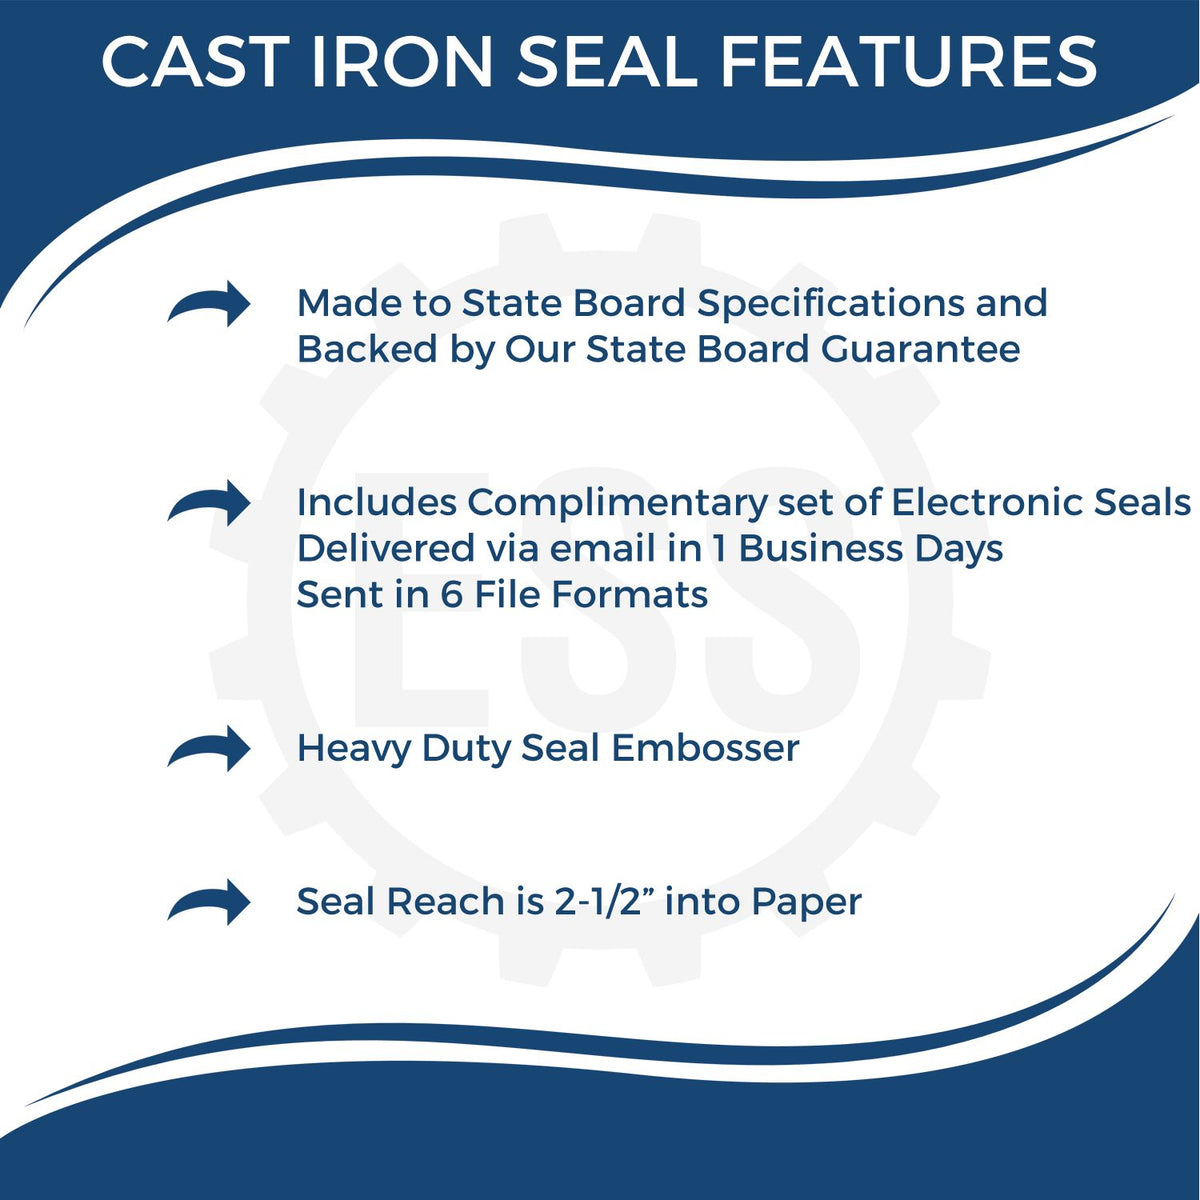 A picture of an infographic highlighting the selling points for the Heavy Duty Cast Iron New Jersey Geologist Seal Embosser